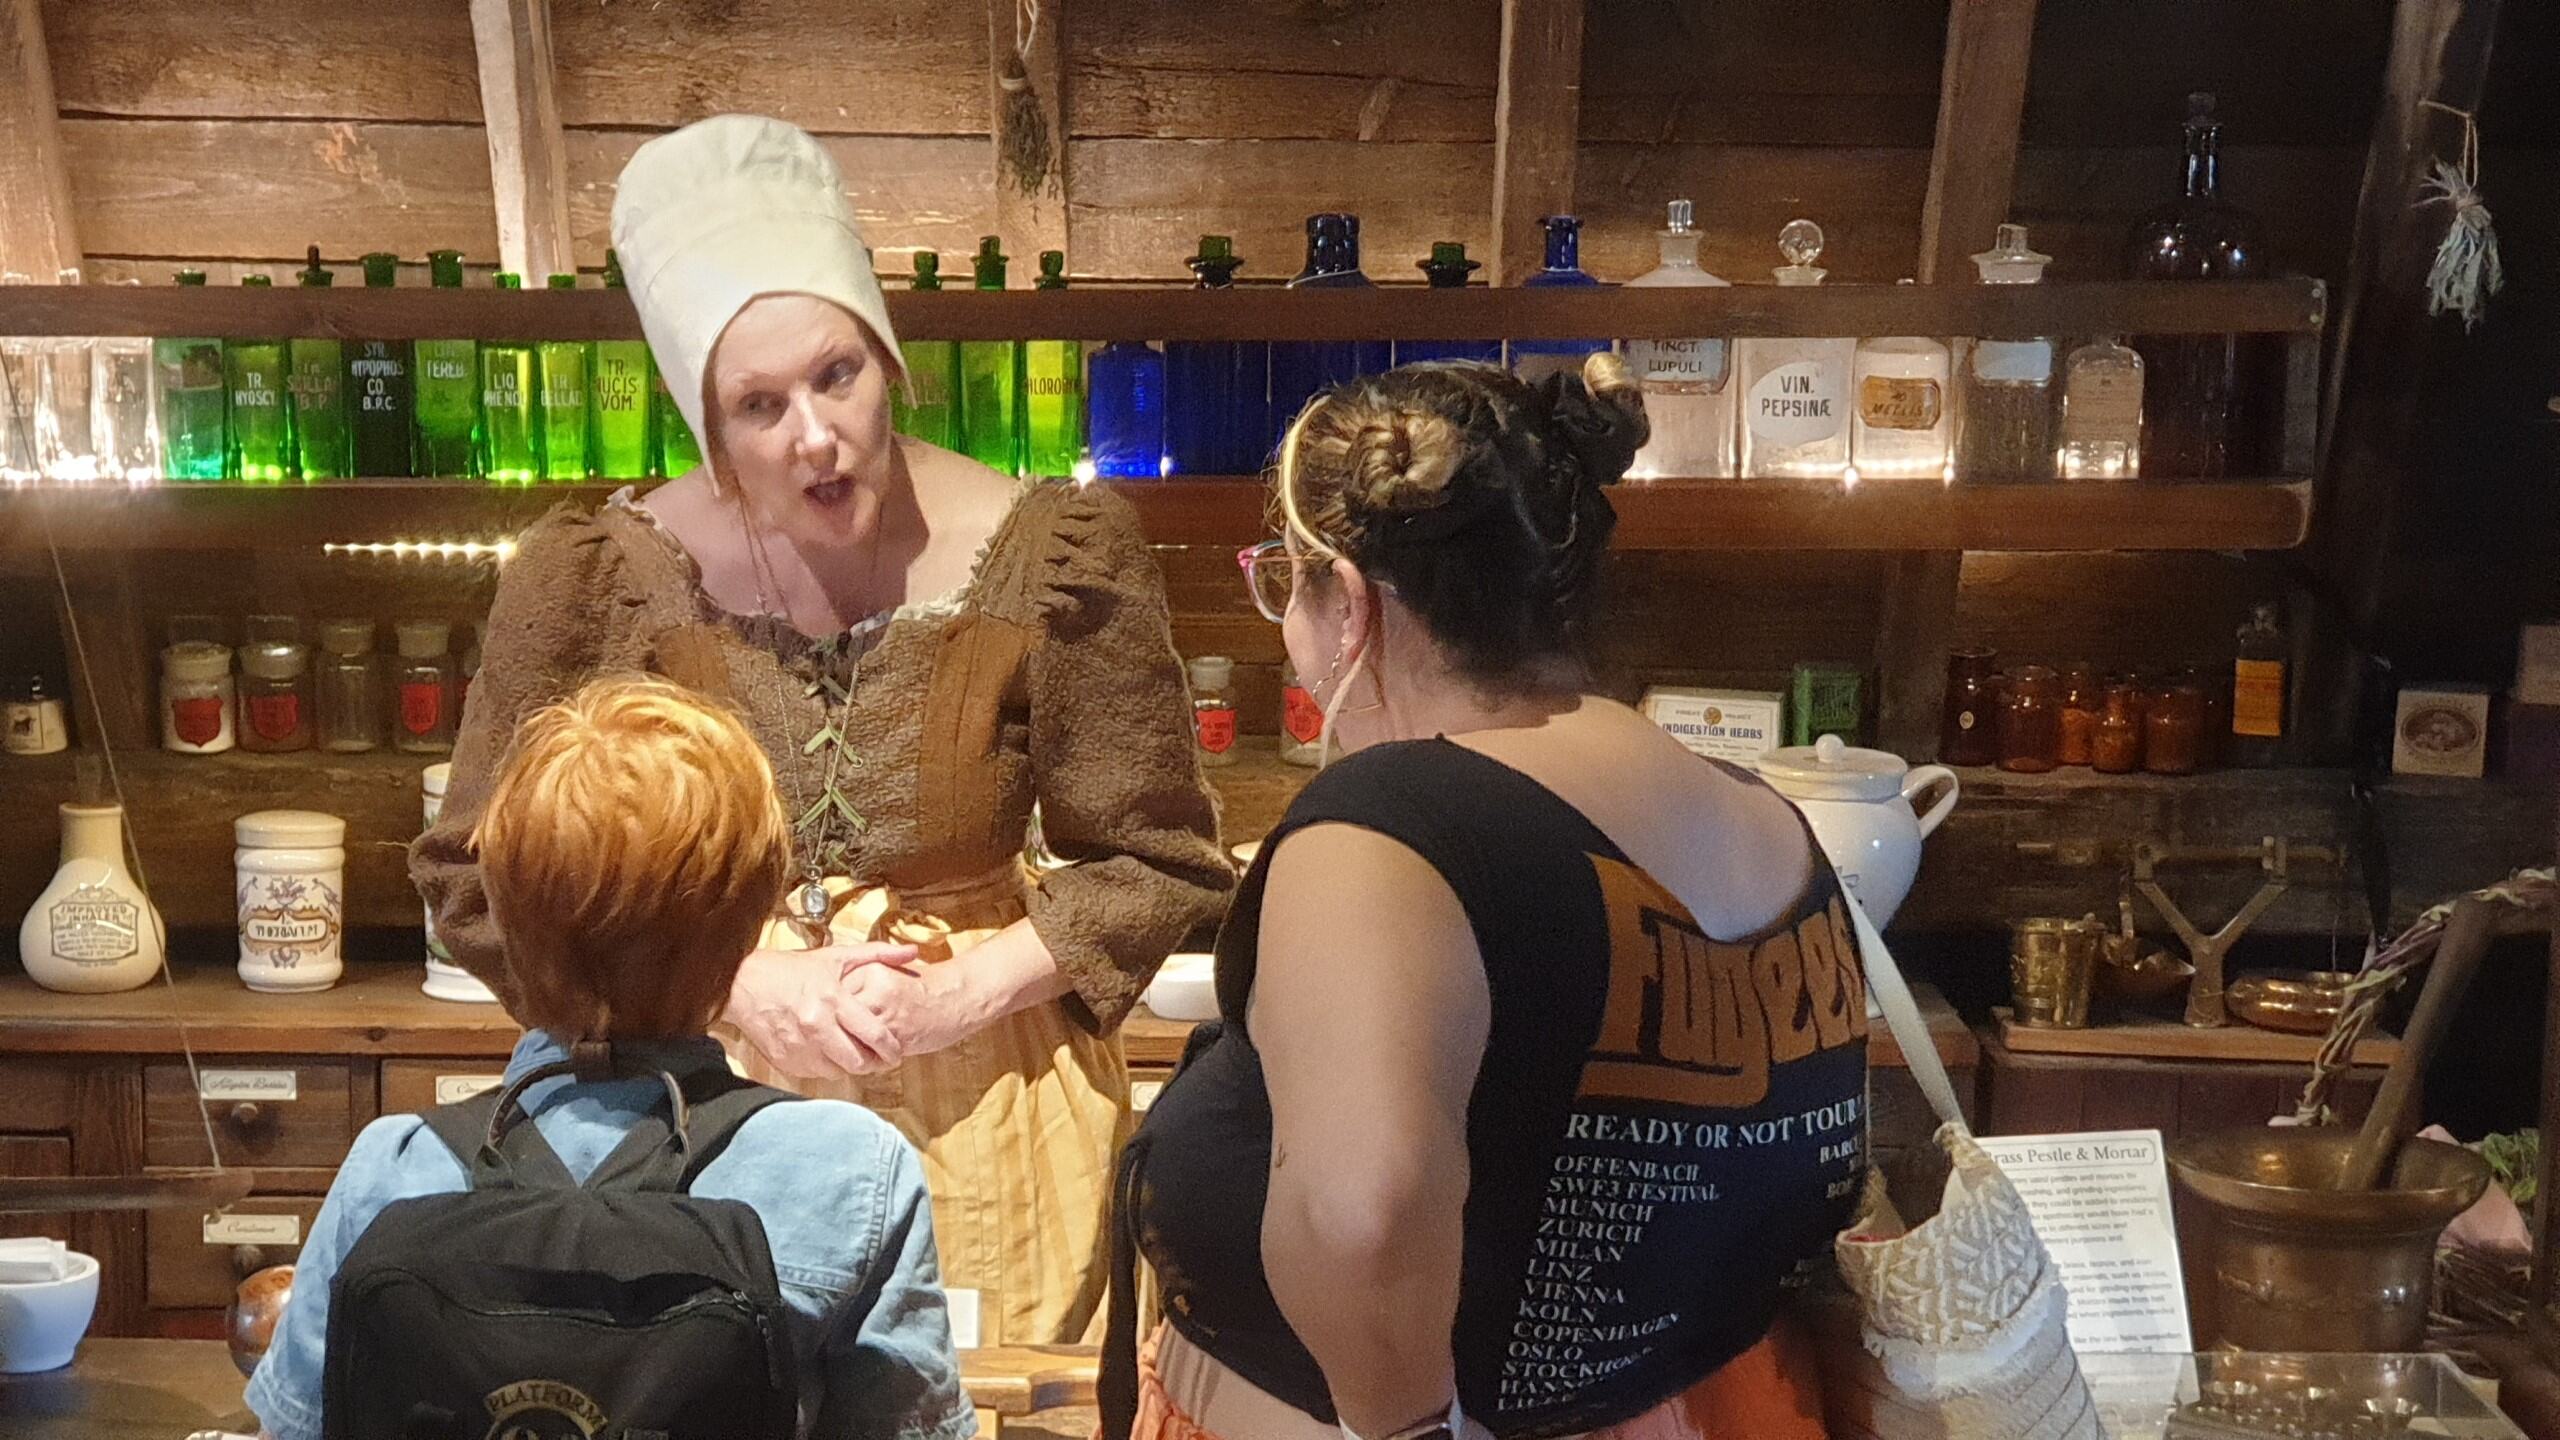 A woman in historical costume stands behind the apothecary counter and speaks to an adult and child visitors